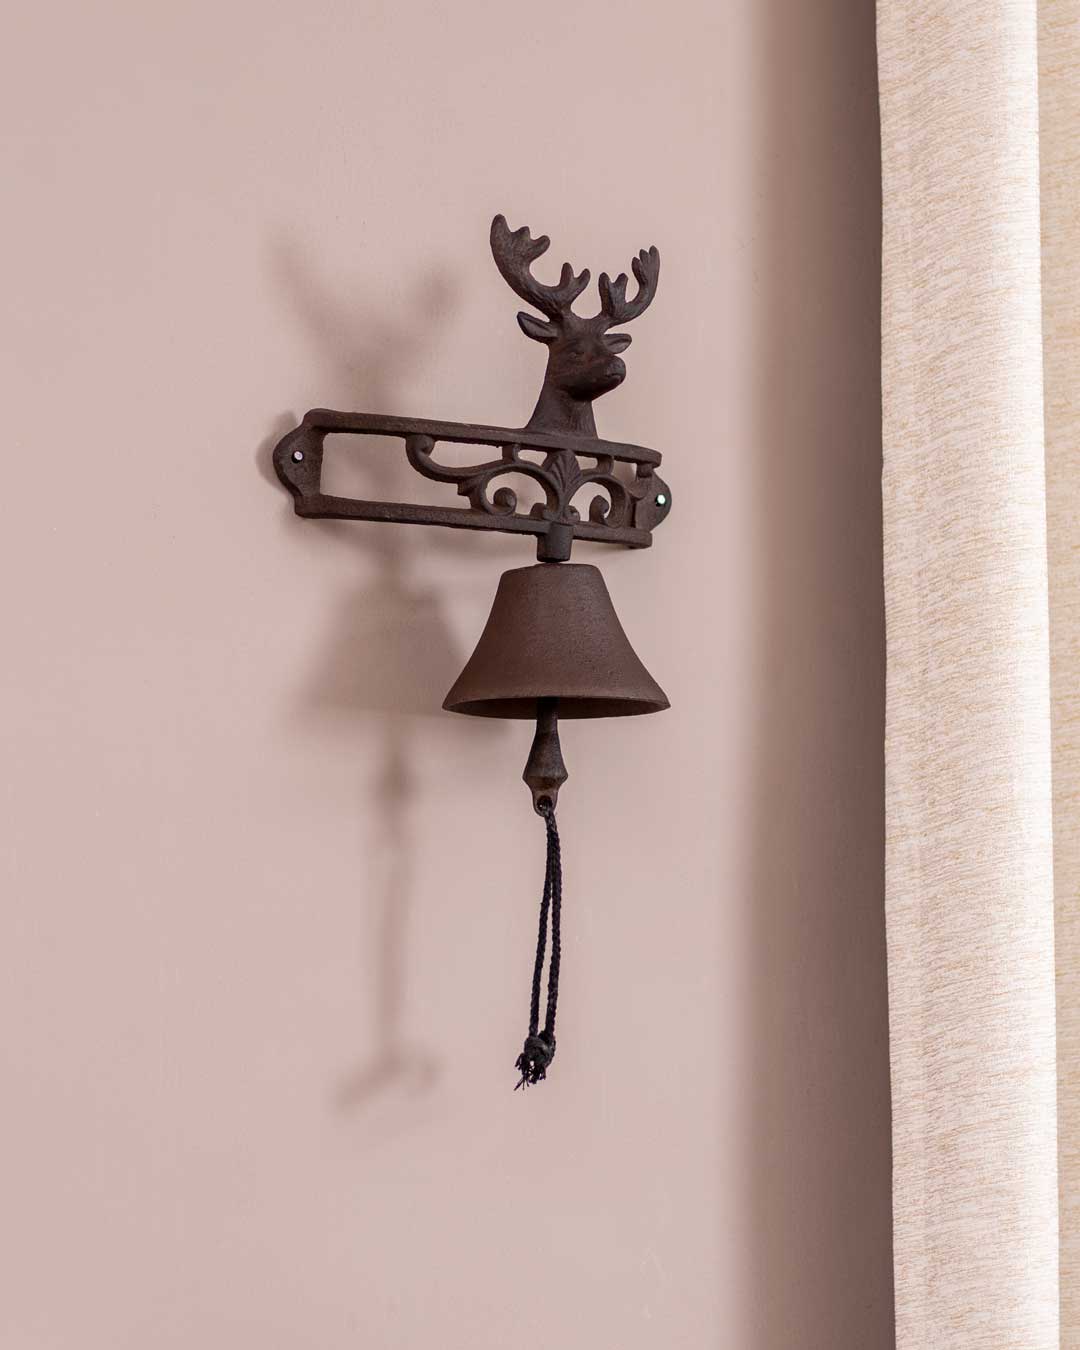 Antique-style cast iron dinner bell with a decorative reindeer, perfect for wall mounting.